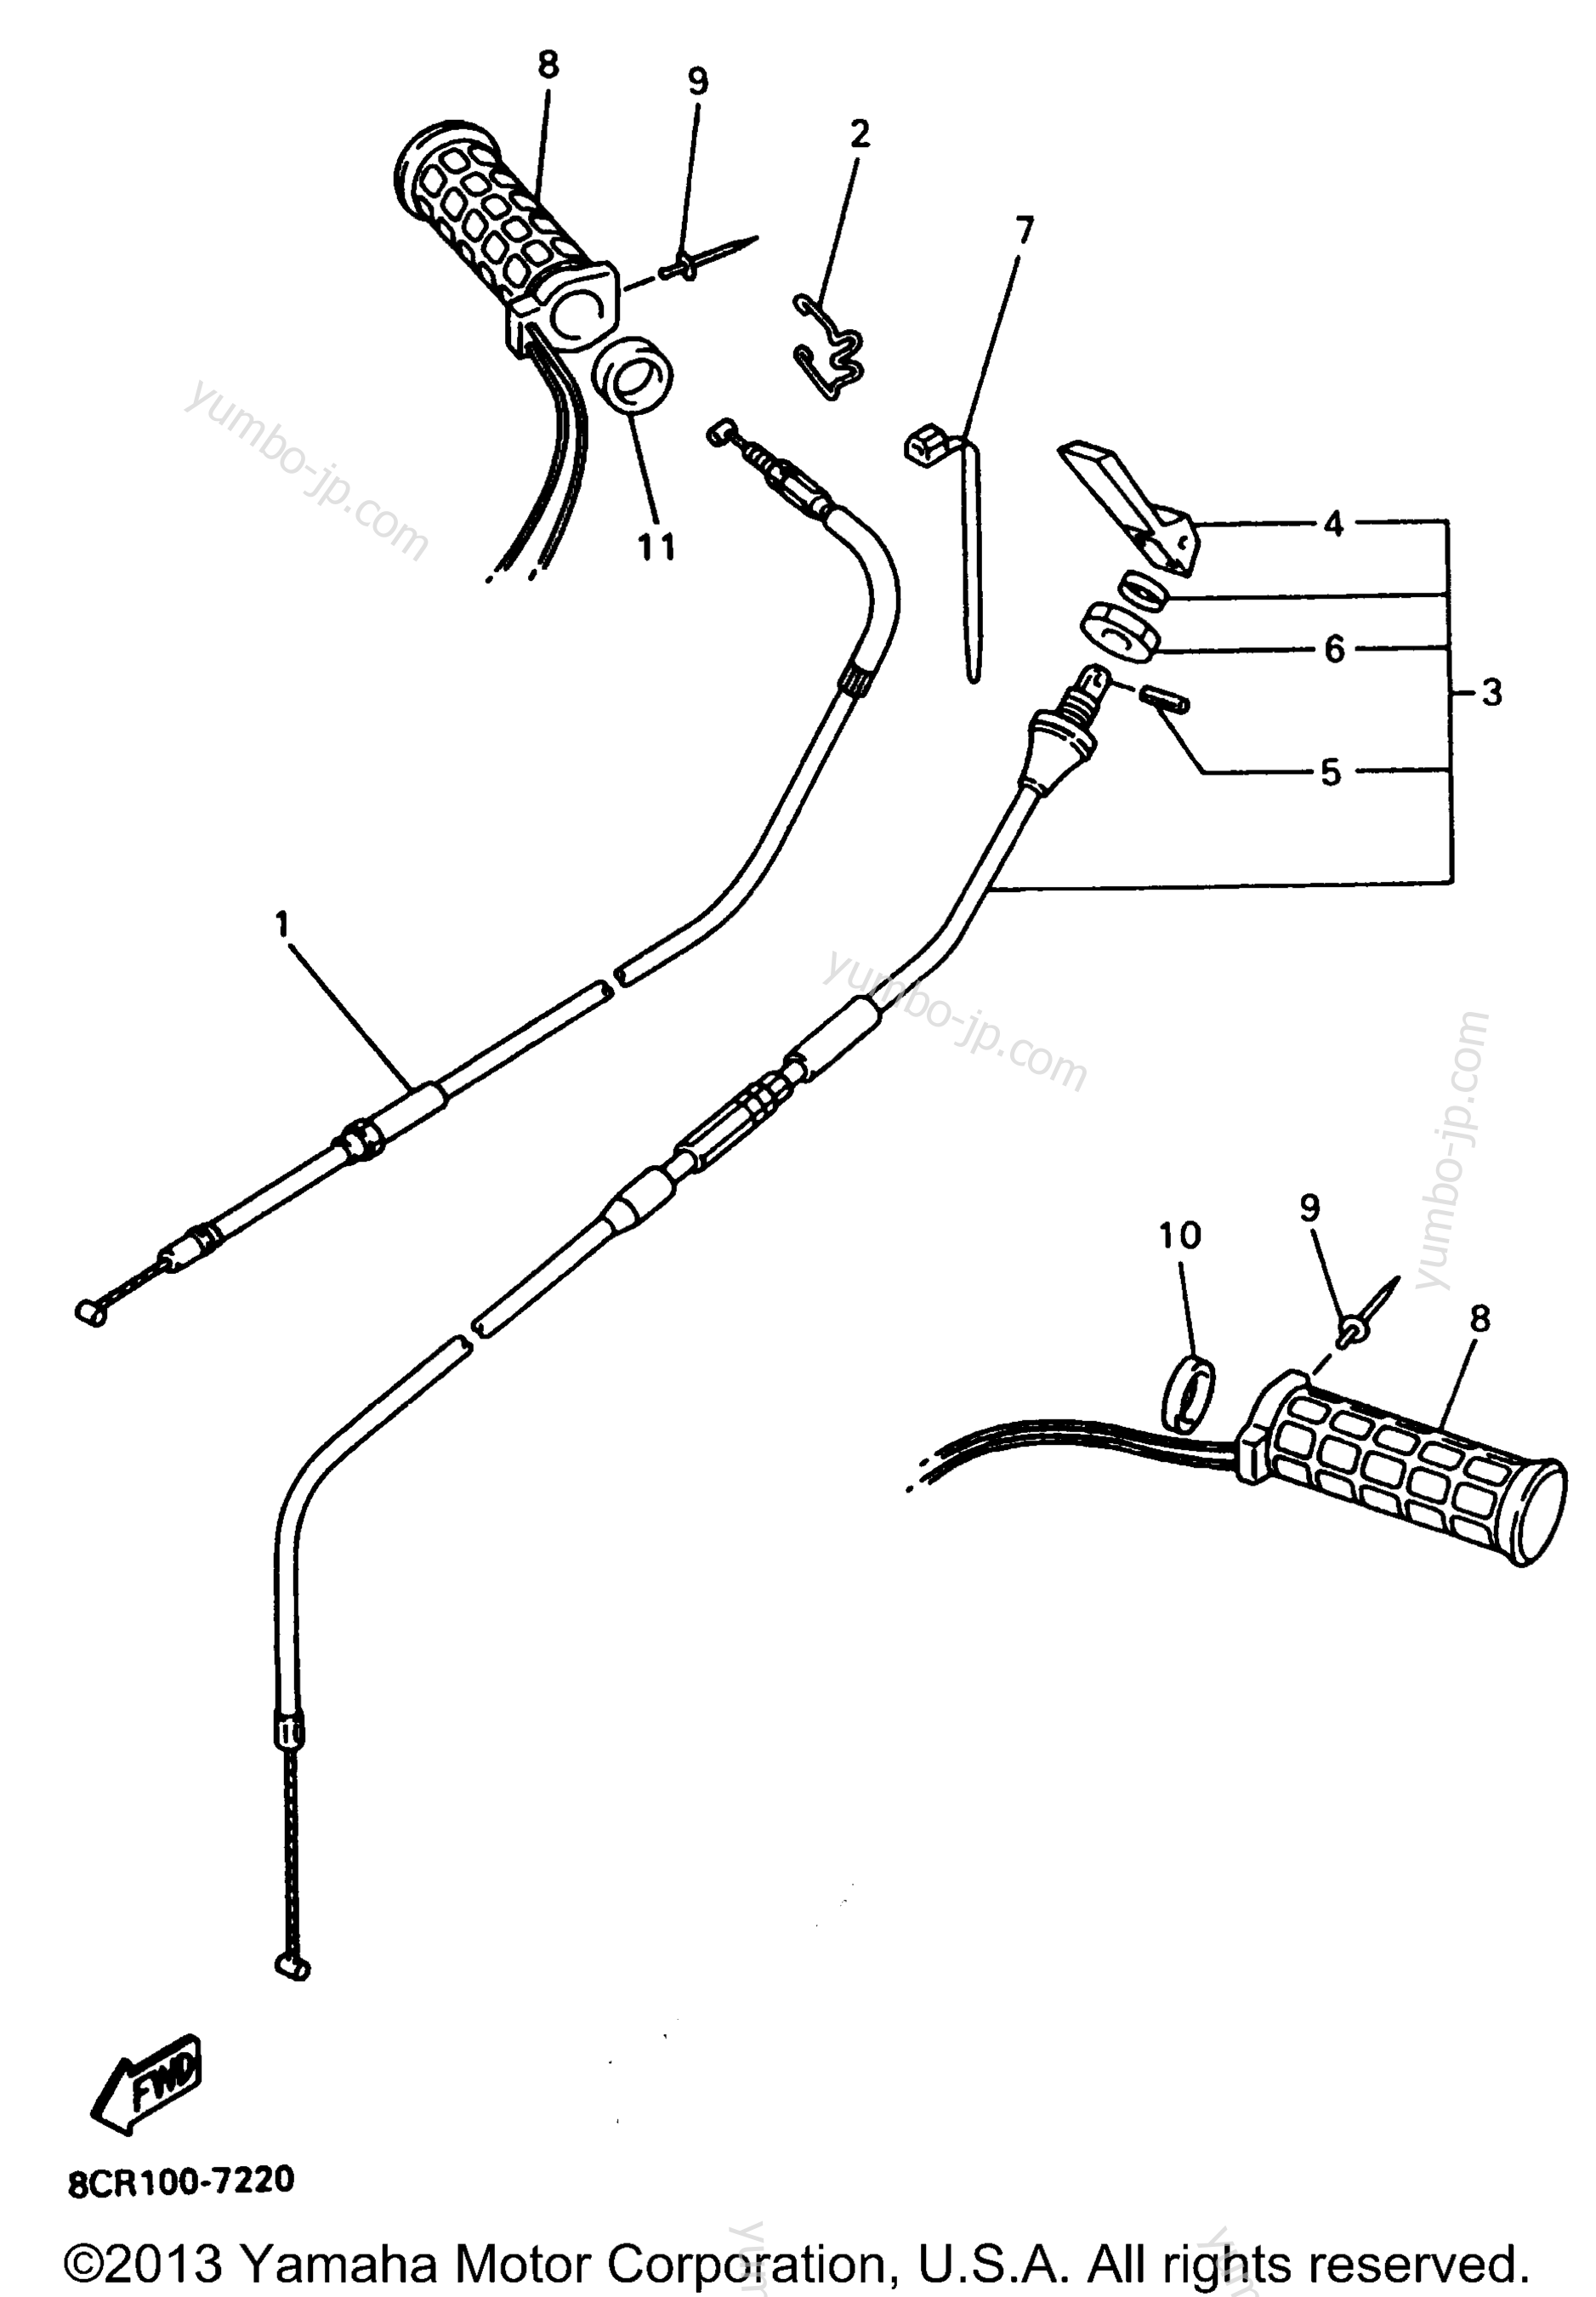 CONTROL CABLE for snowmobiles YAMAHA VMAX 600 XTC (REVERSE) (VX600XTCRA) 1997 year